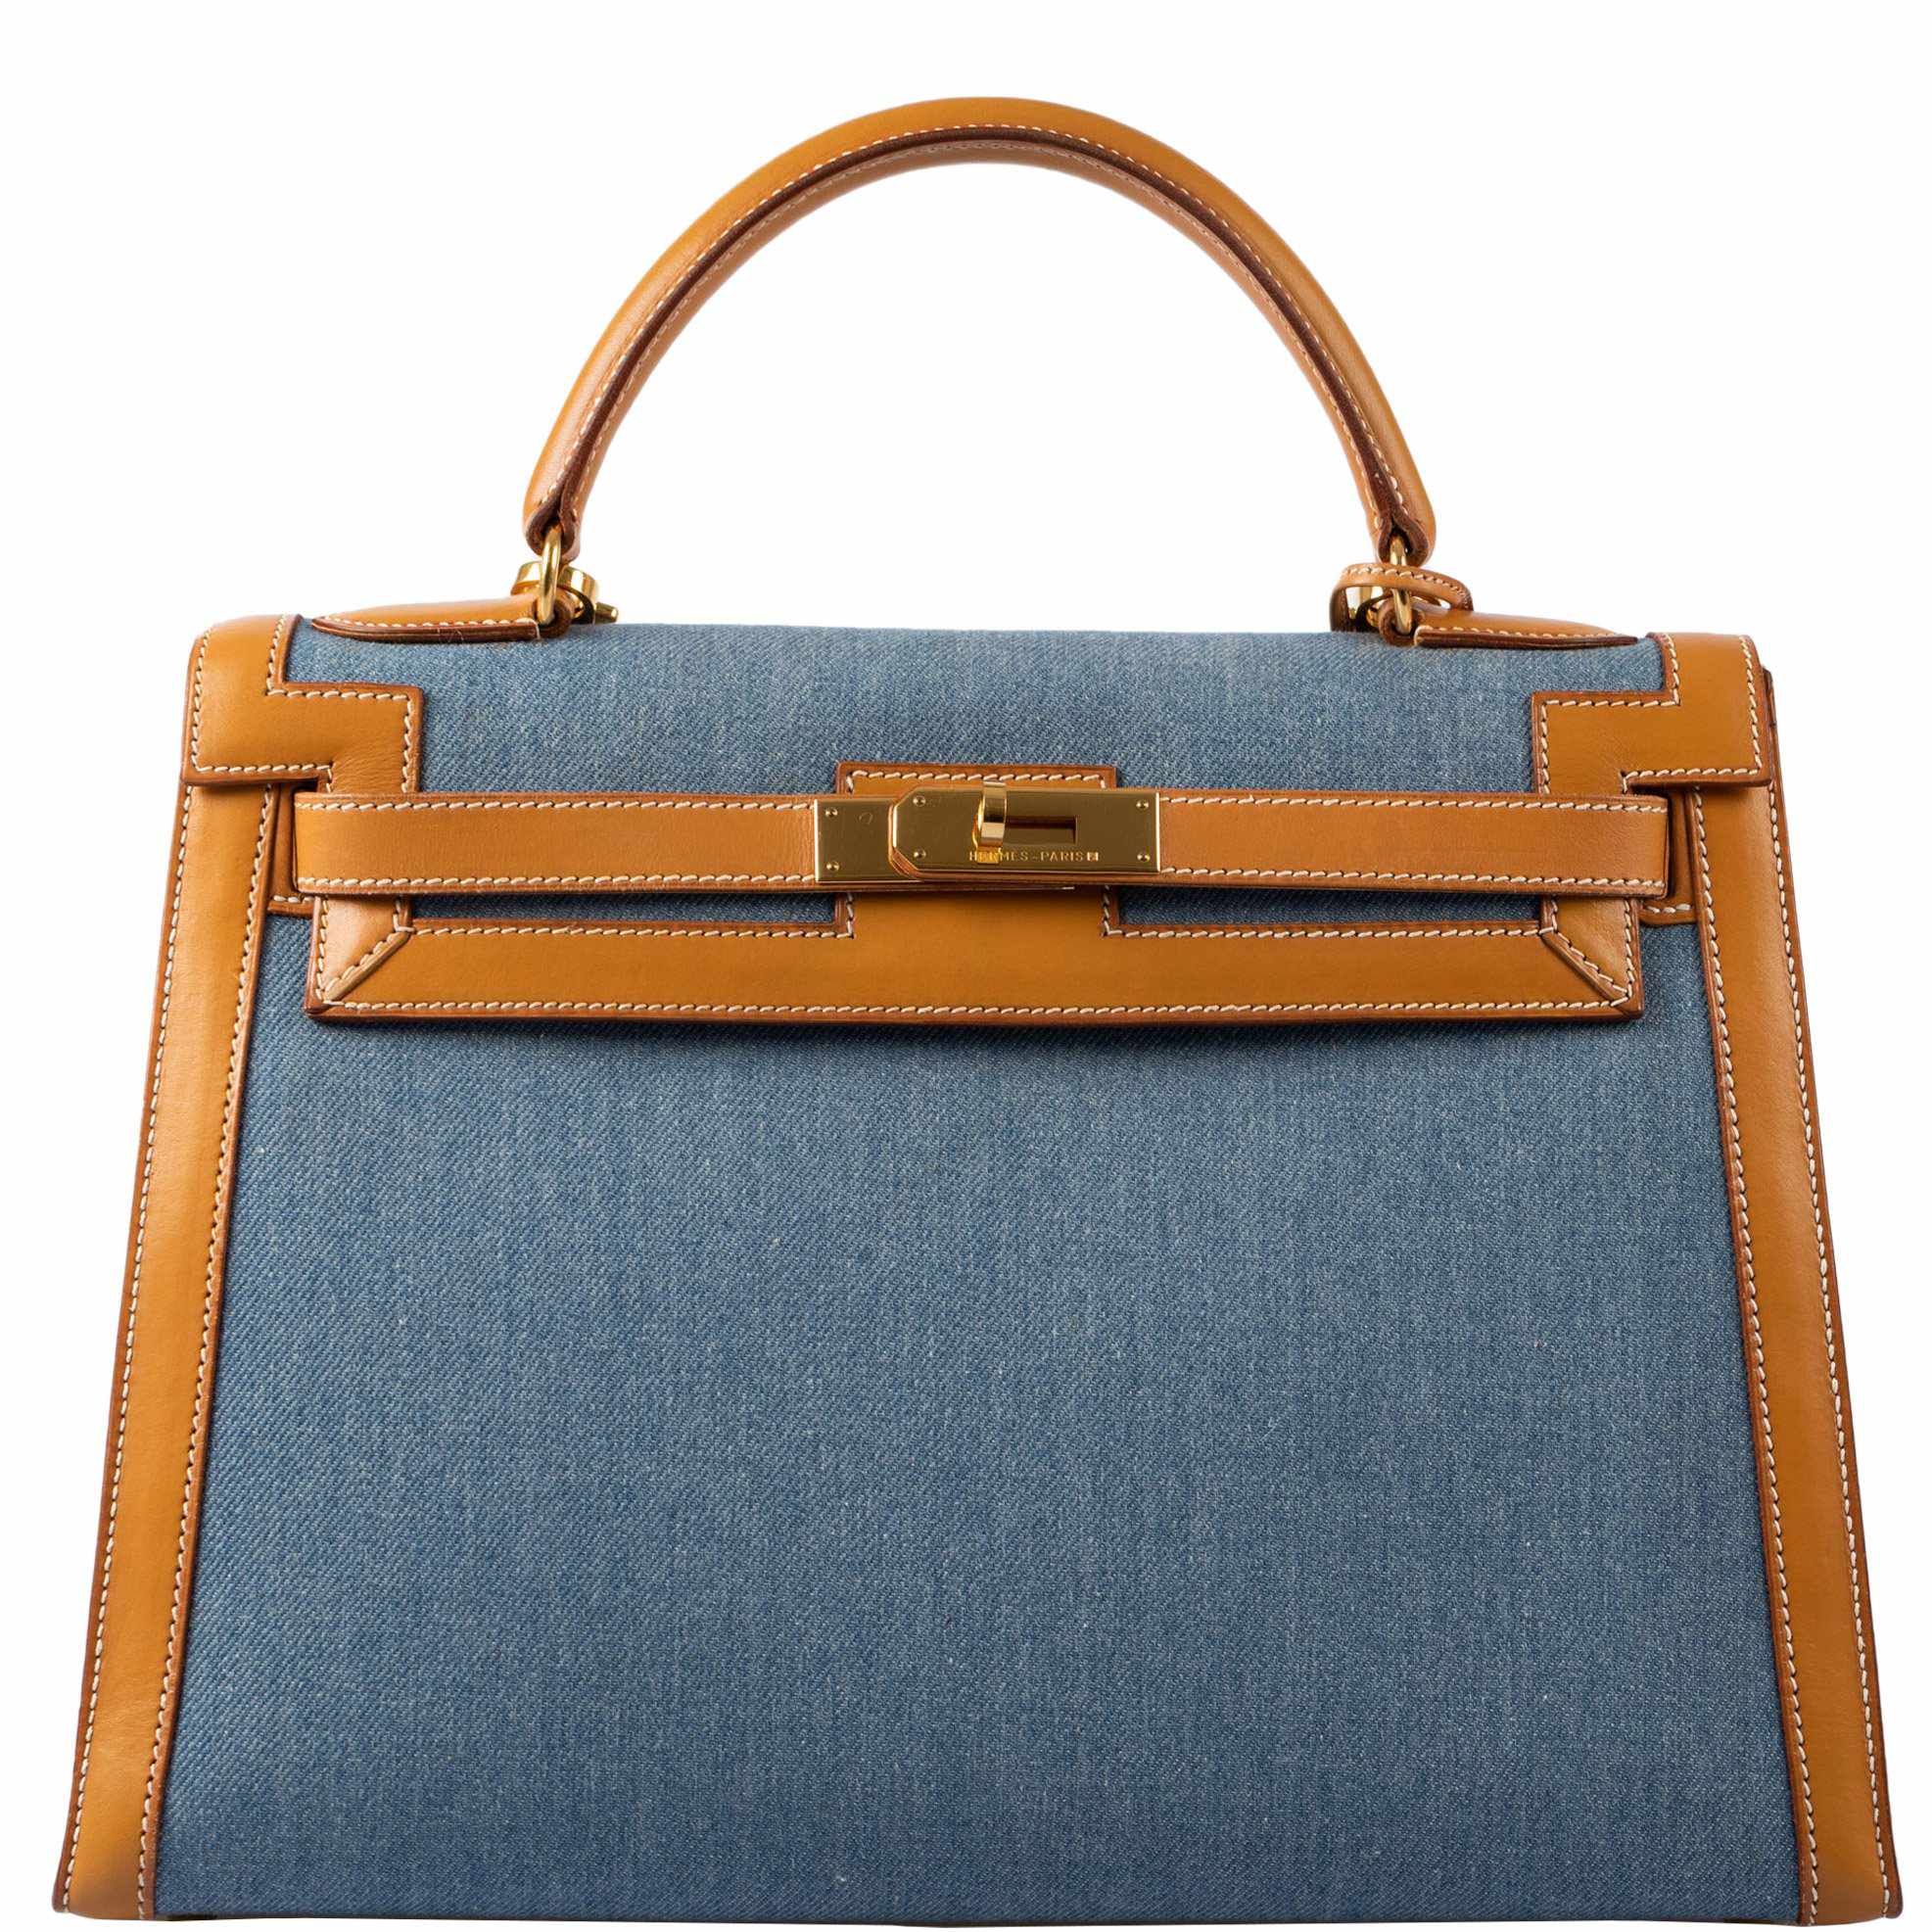 Hermes Vintage Kelly Bag 32cm in Gold Box Leather and Gold Hardware –  Sellier